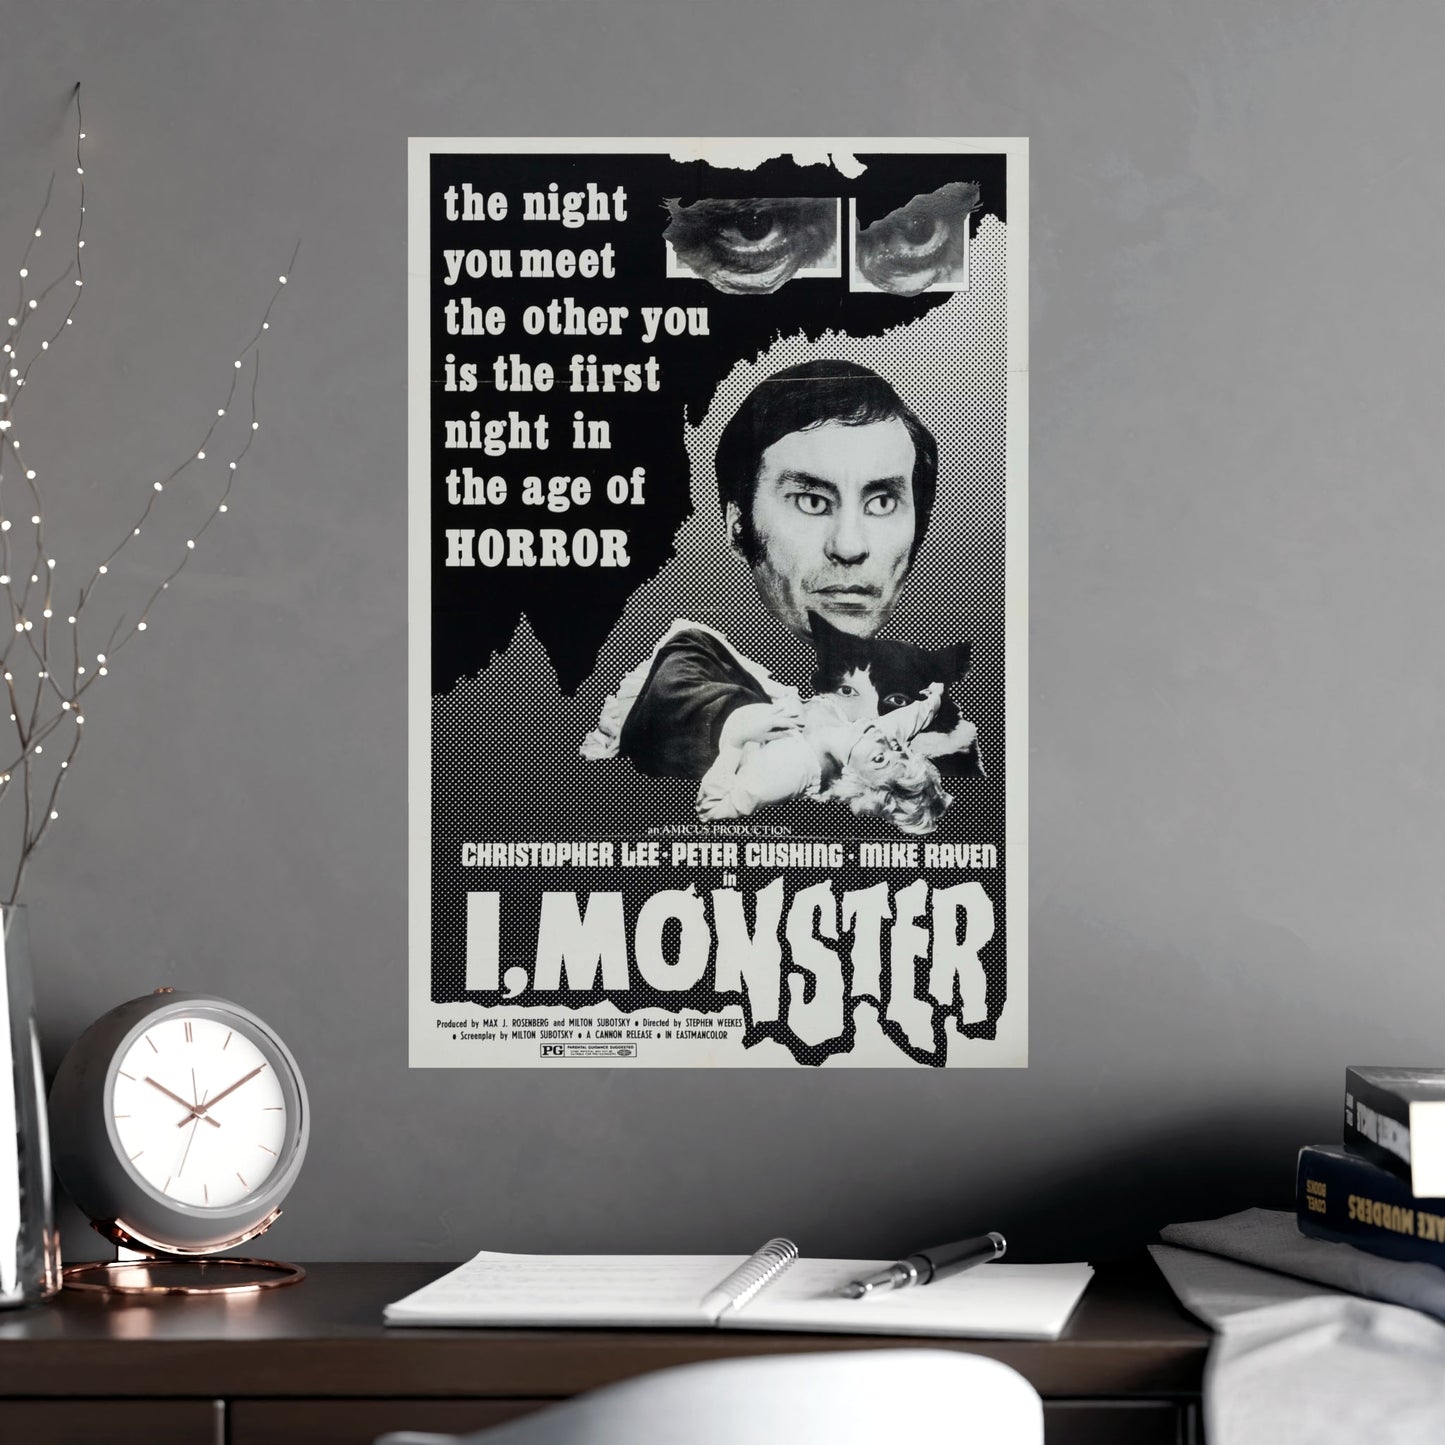 I, MONSTER (2) 1971 - Paper Movie Poster-The Sticker Space